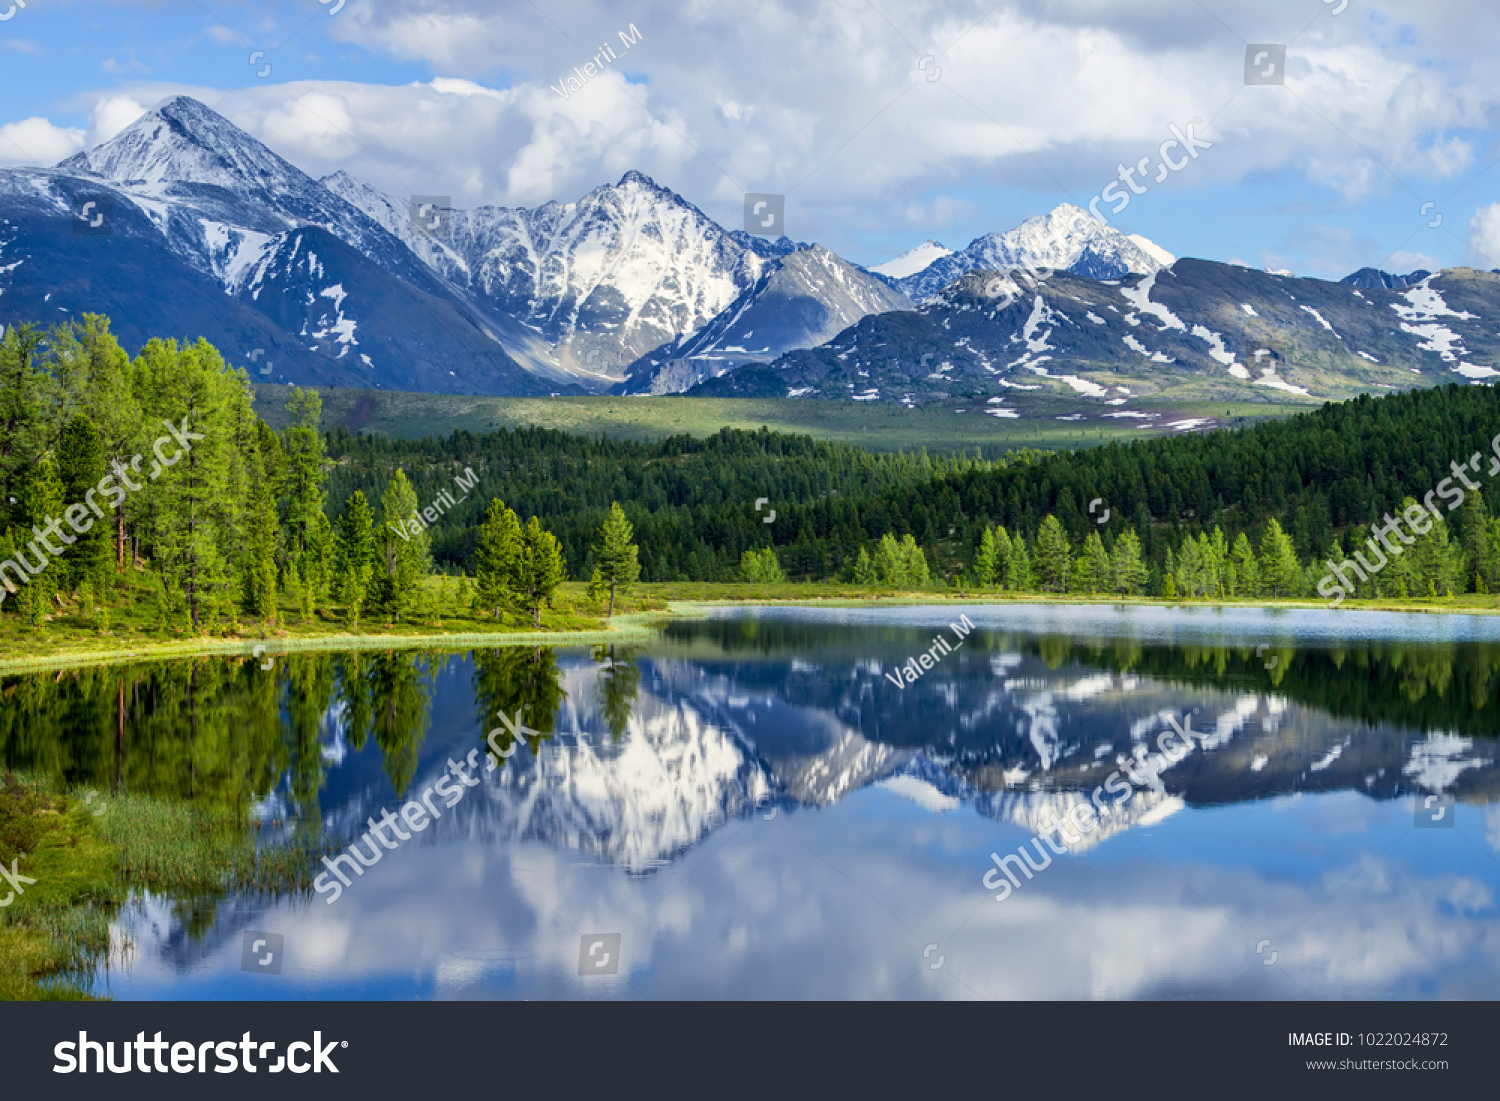 Wild mountain lake in the Altai mountains, summer landscape, beautiful reflection #1022024872